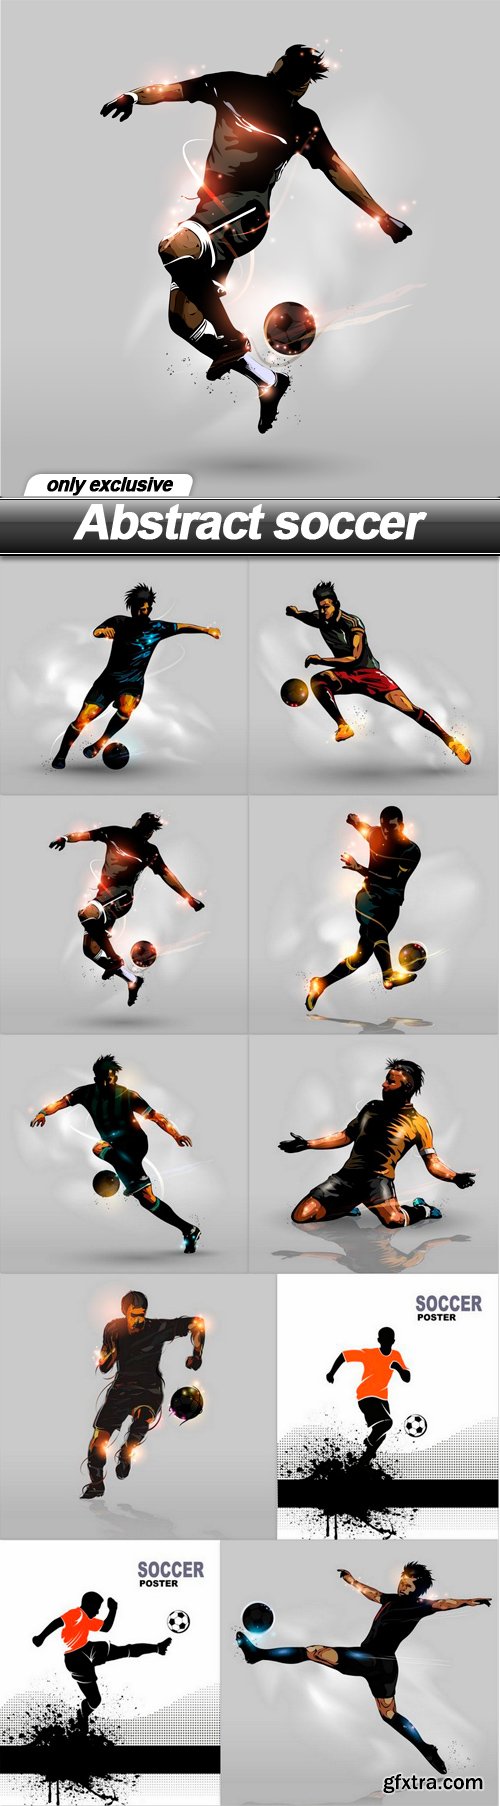 Abstract soccer - 10 EPS